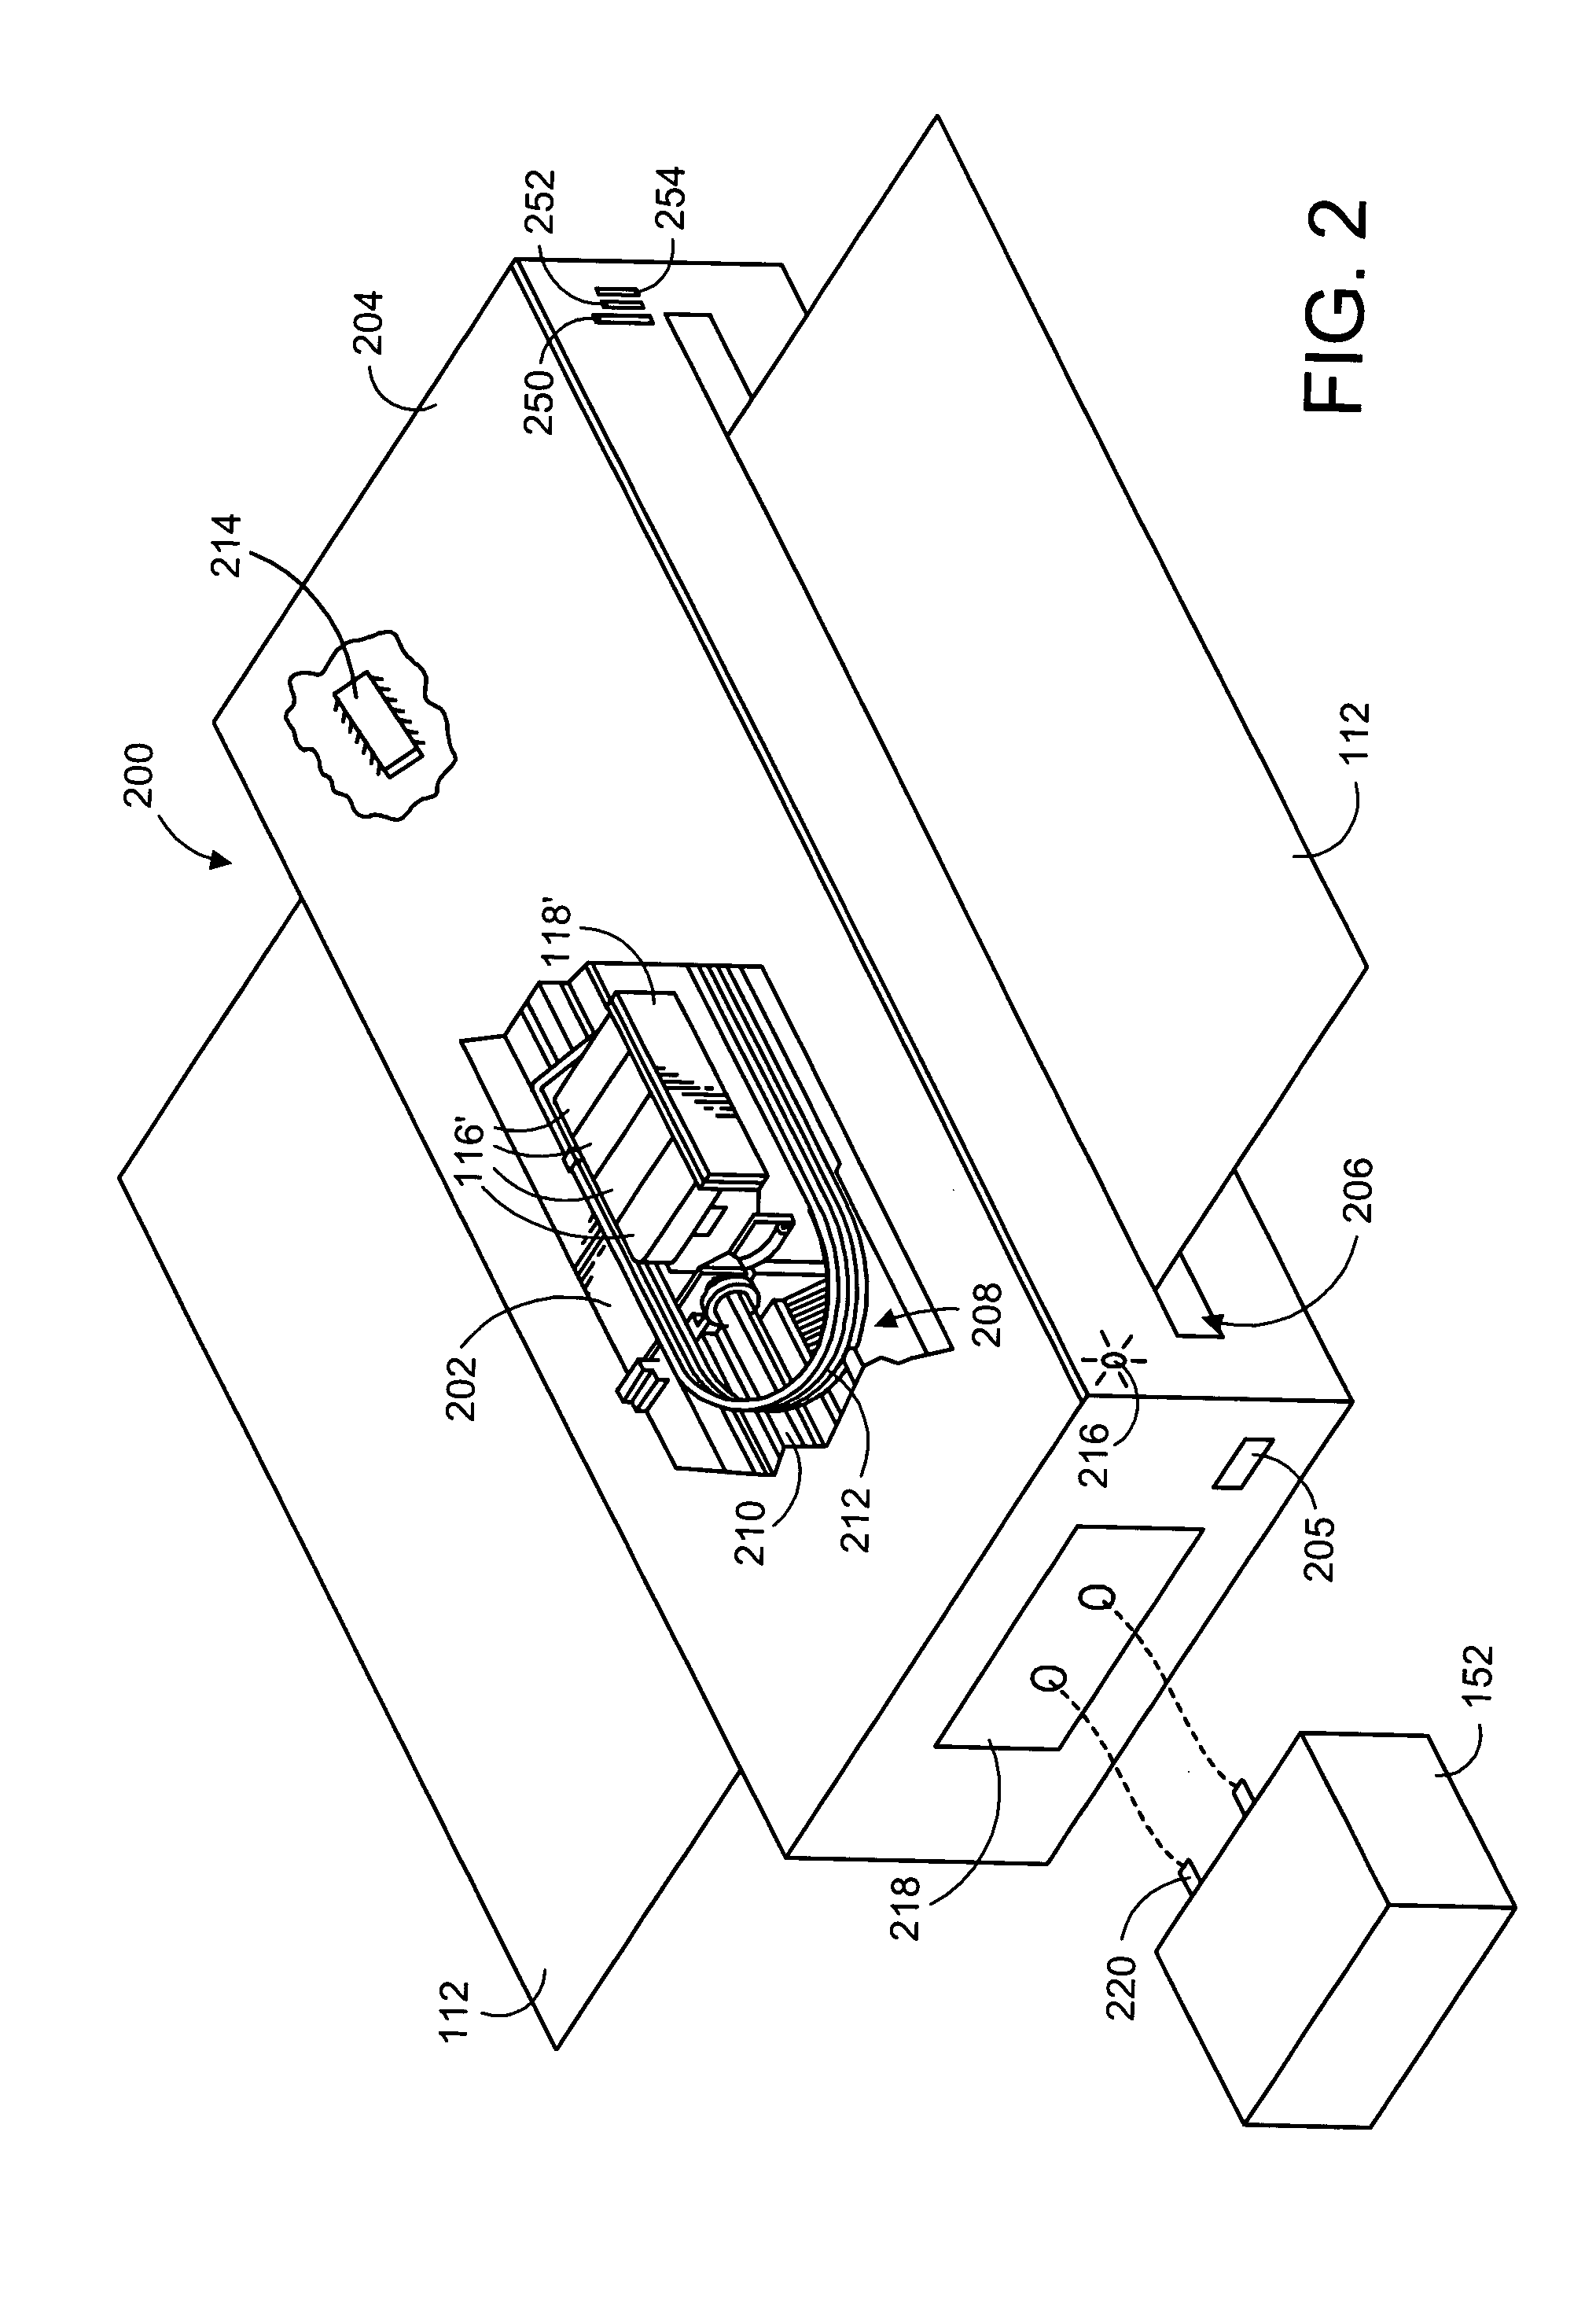 Recyclable printing mechanism and related method